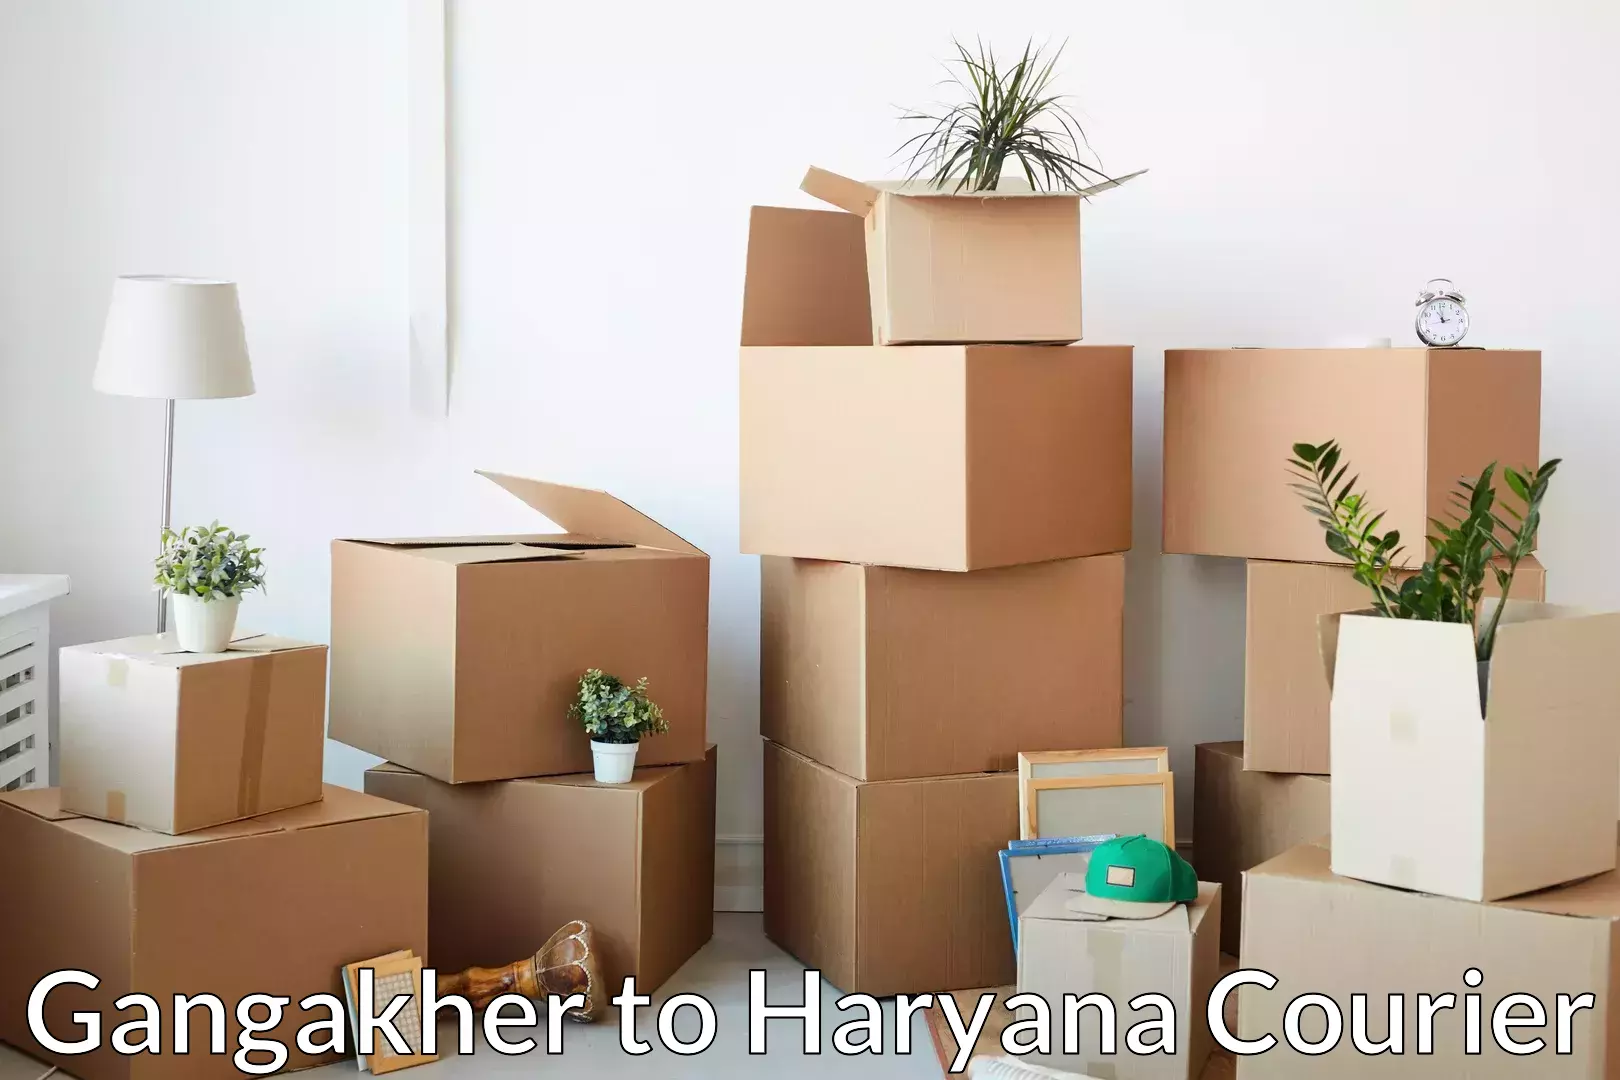 Quality relocation services in Gangakher to Ambala